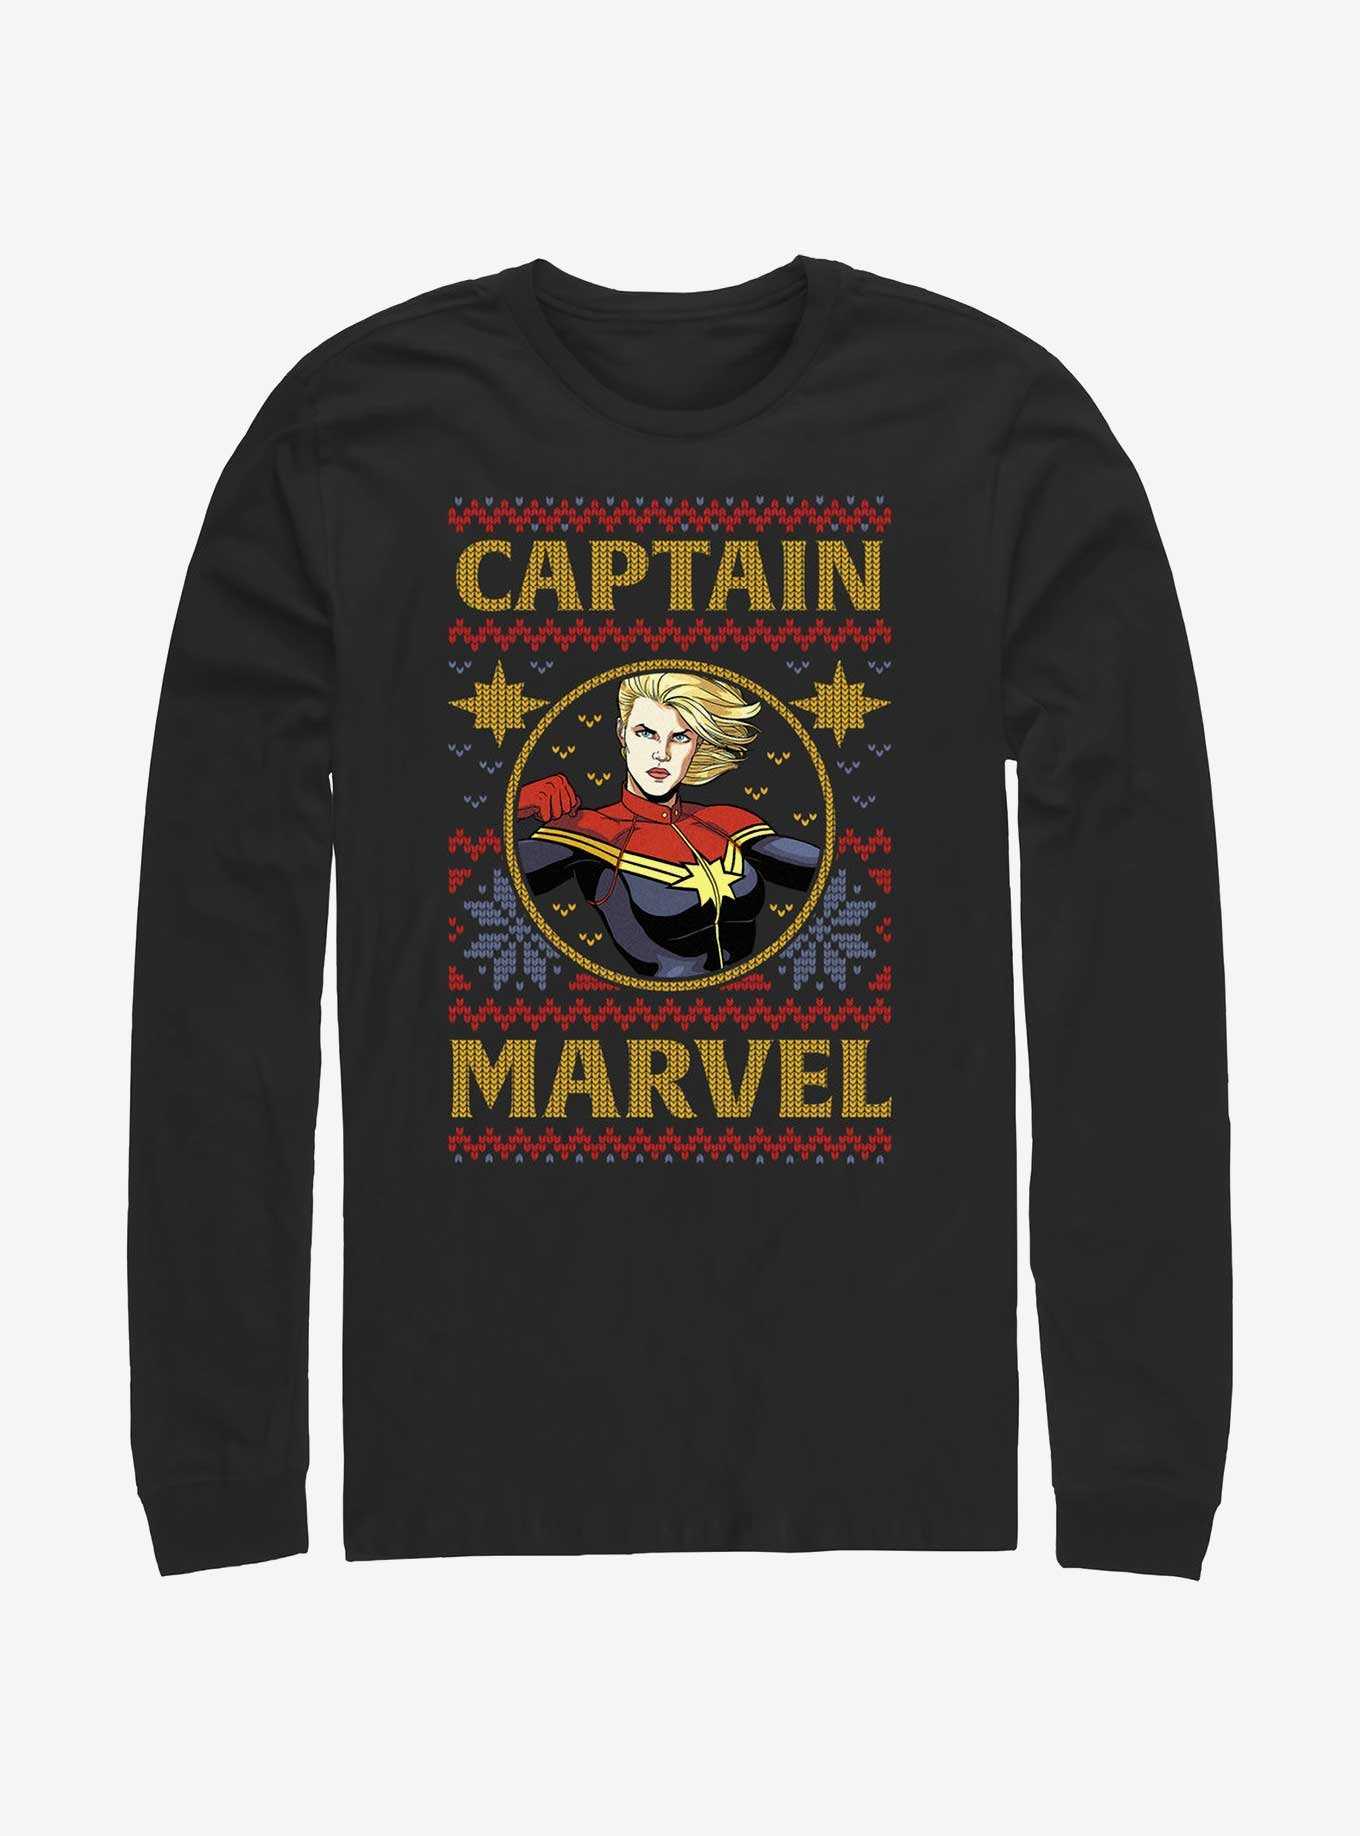 Captain Marvel Clothing & Merch | Her Universe